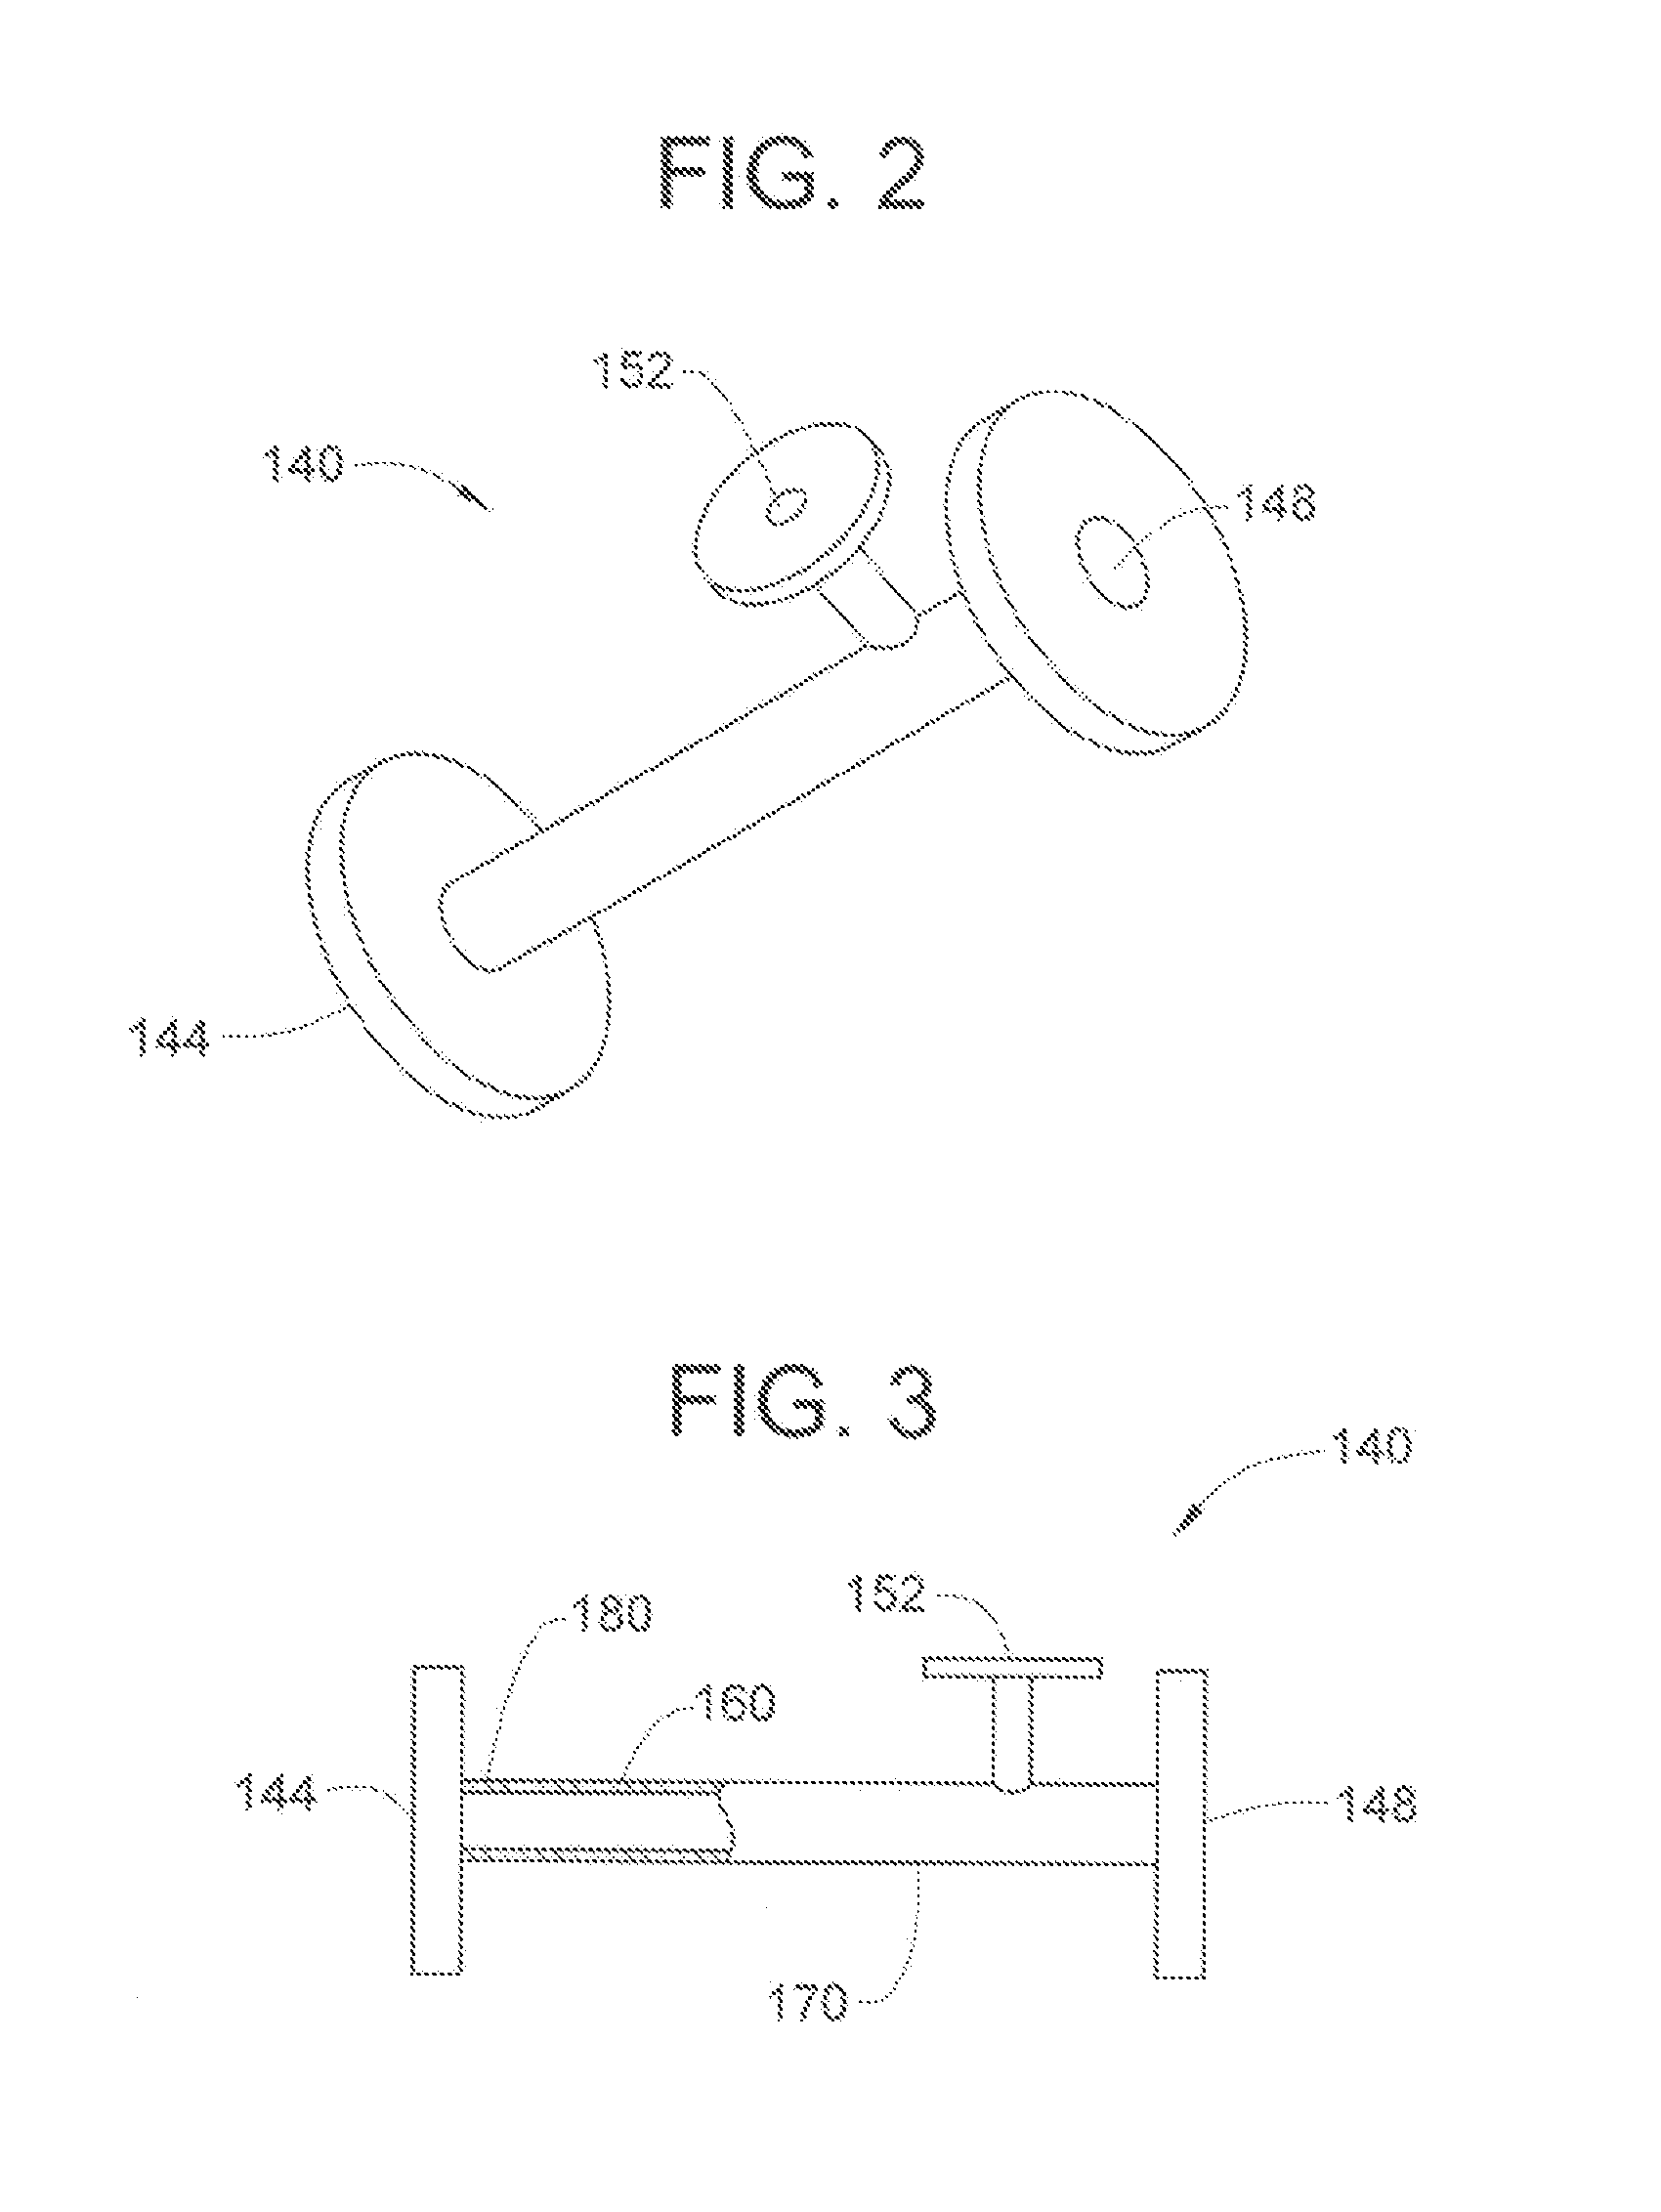 Process for oxidizing one or more thiol compounds